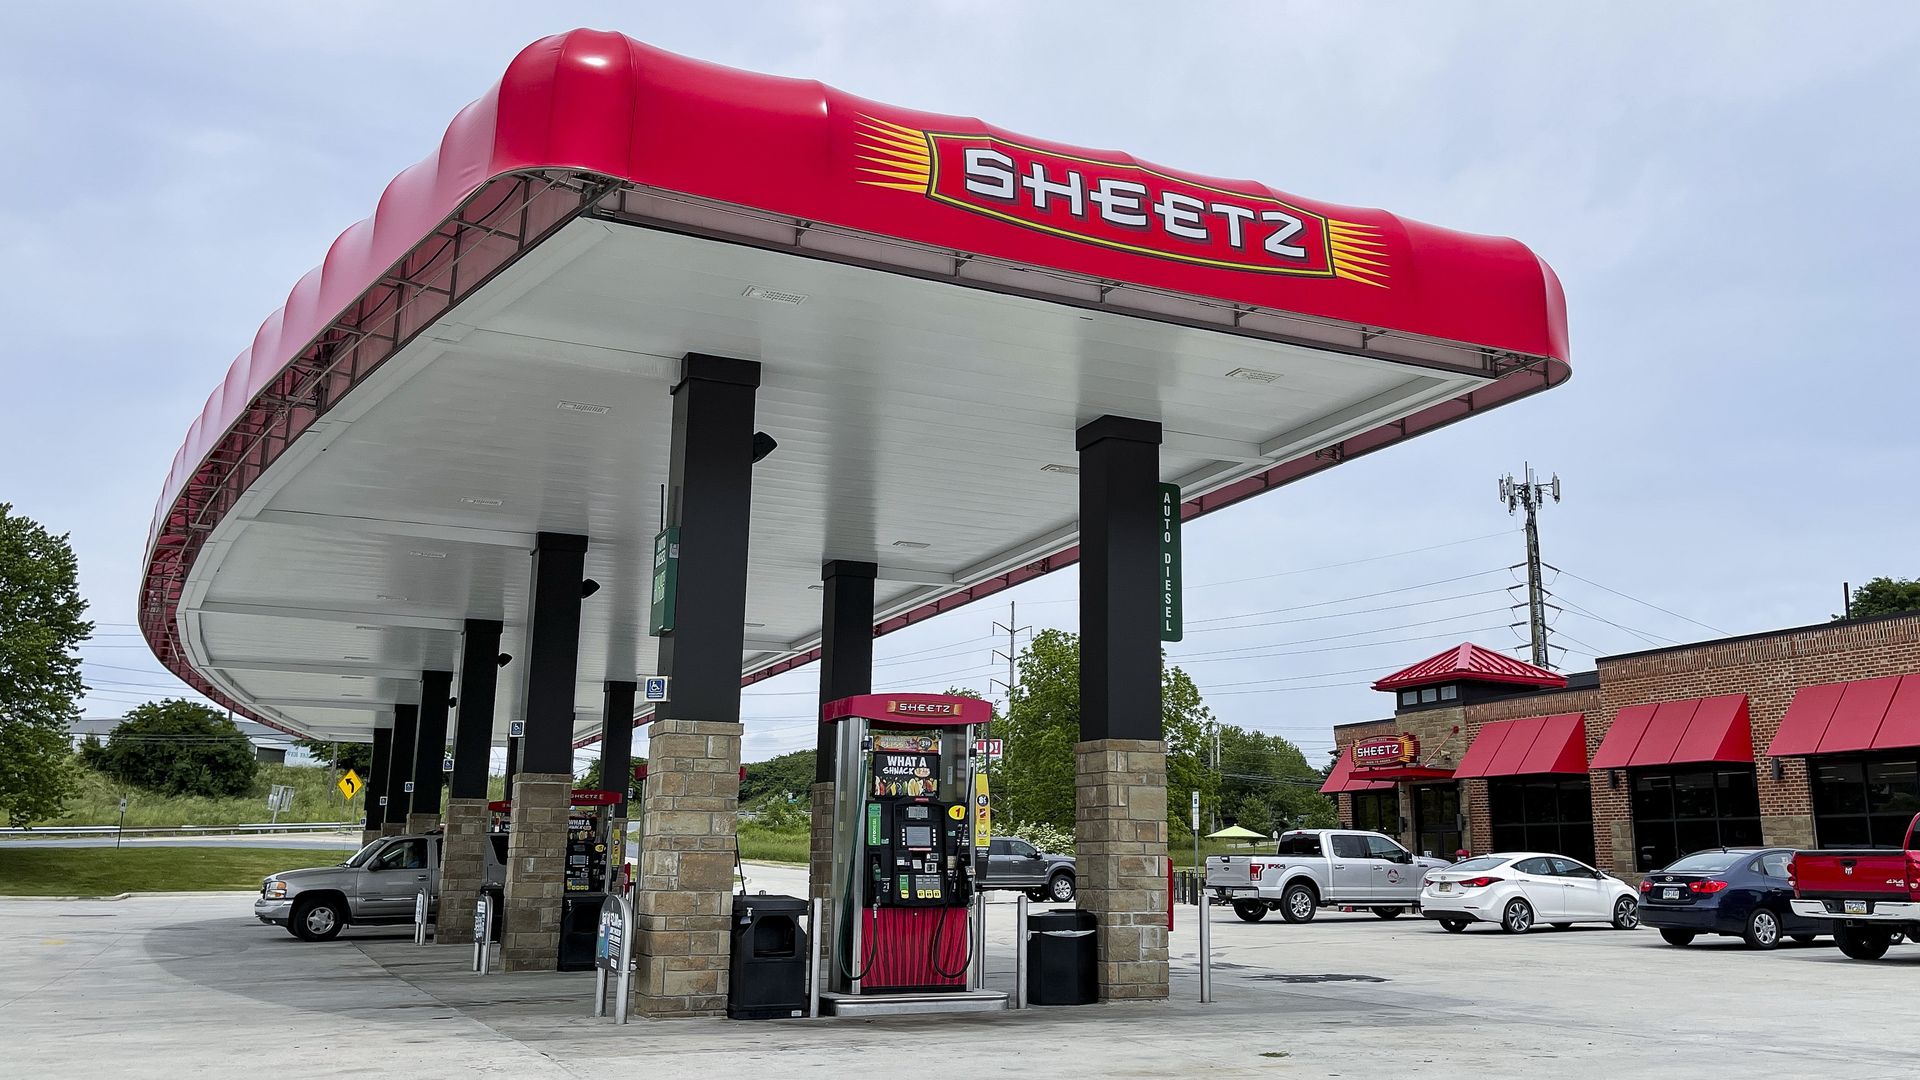 The Sheetz gas station and convenience store in Cumru Township, Penn.